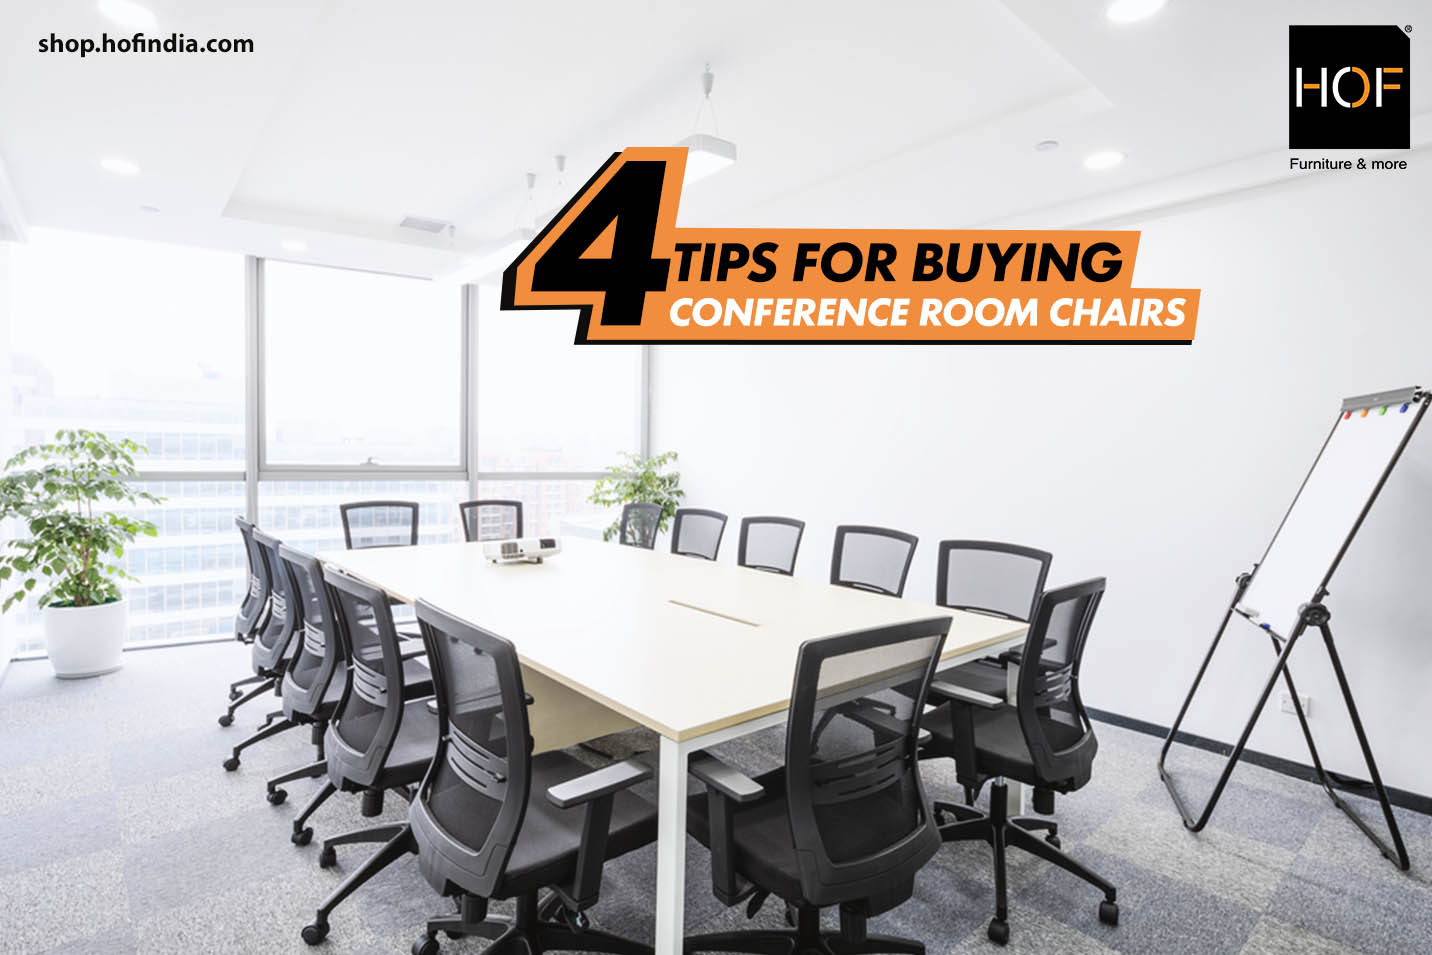 4 tips for buying conference room chairs